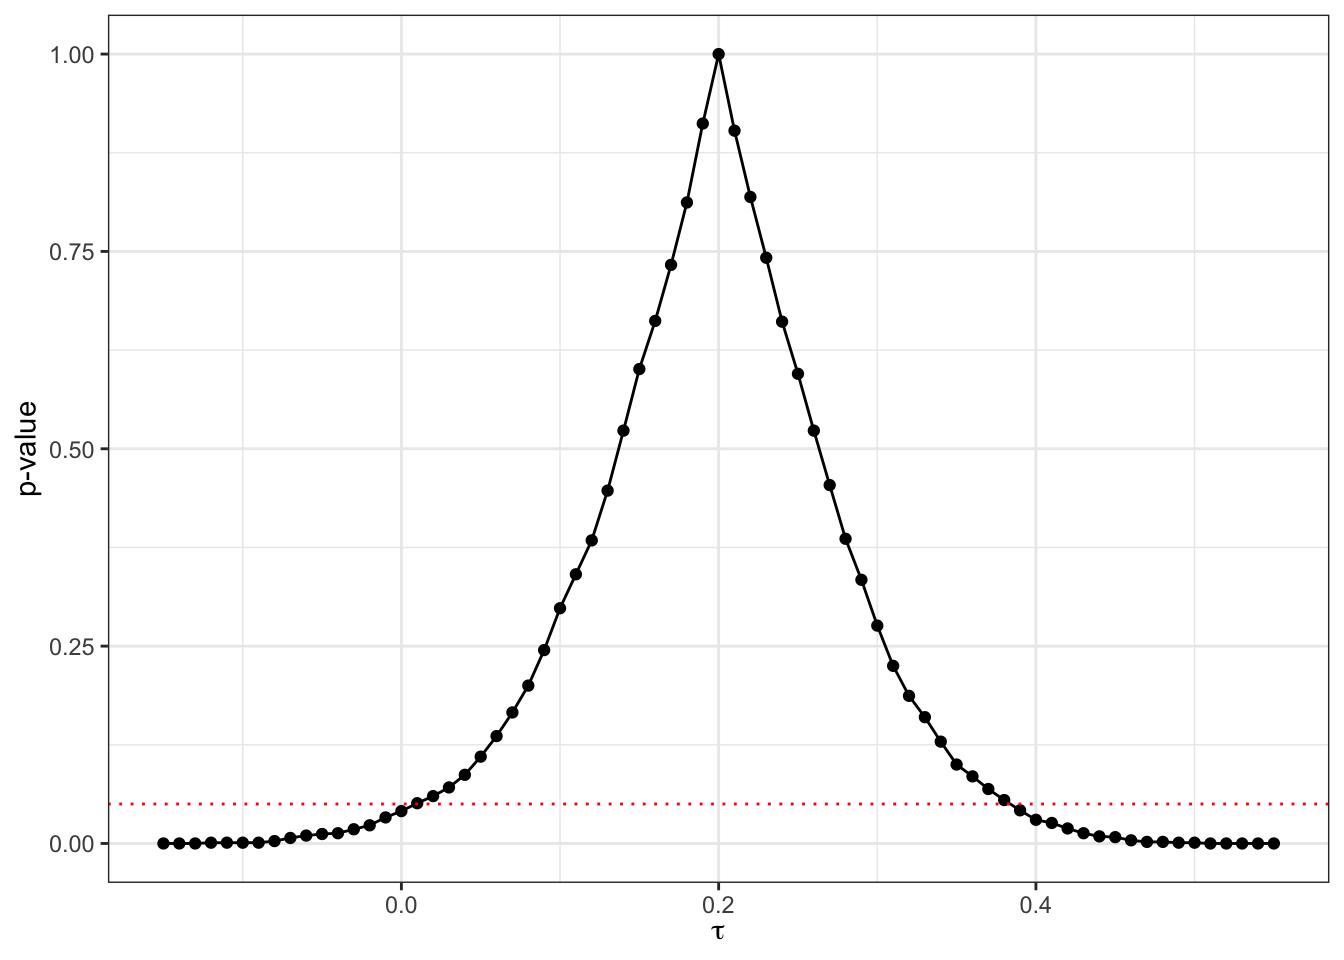 Randomization inference p-values as a function of $\tau$